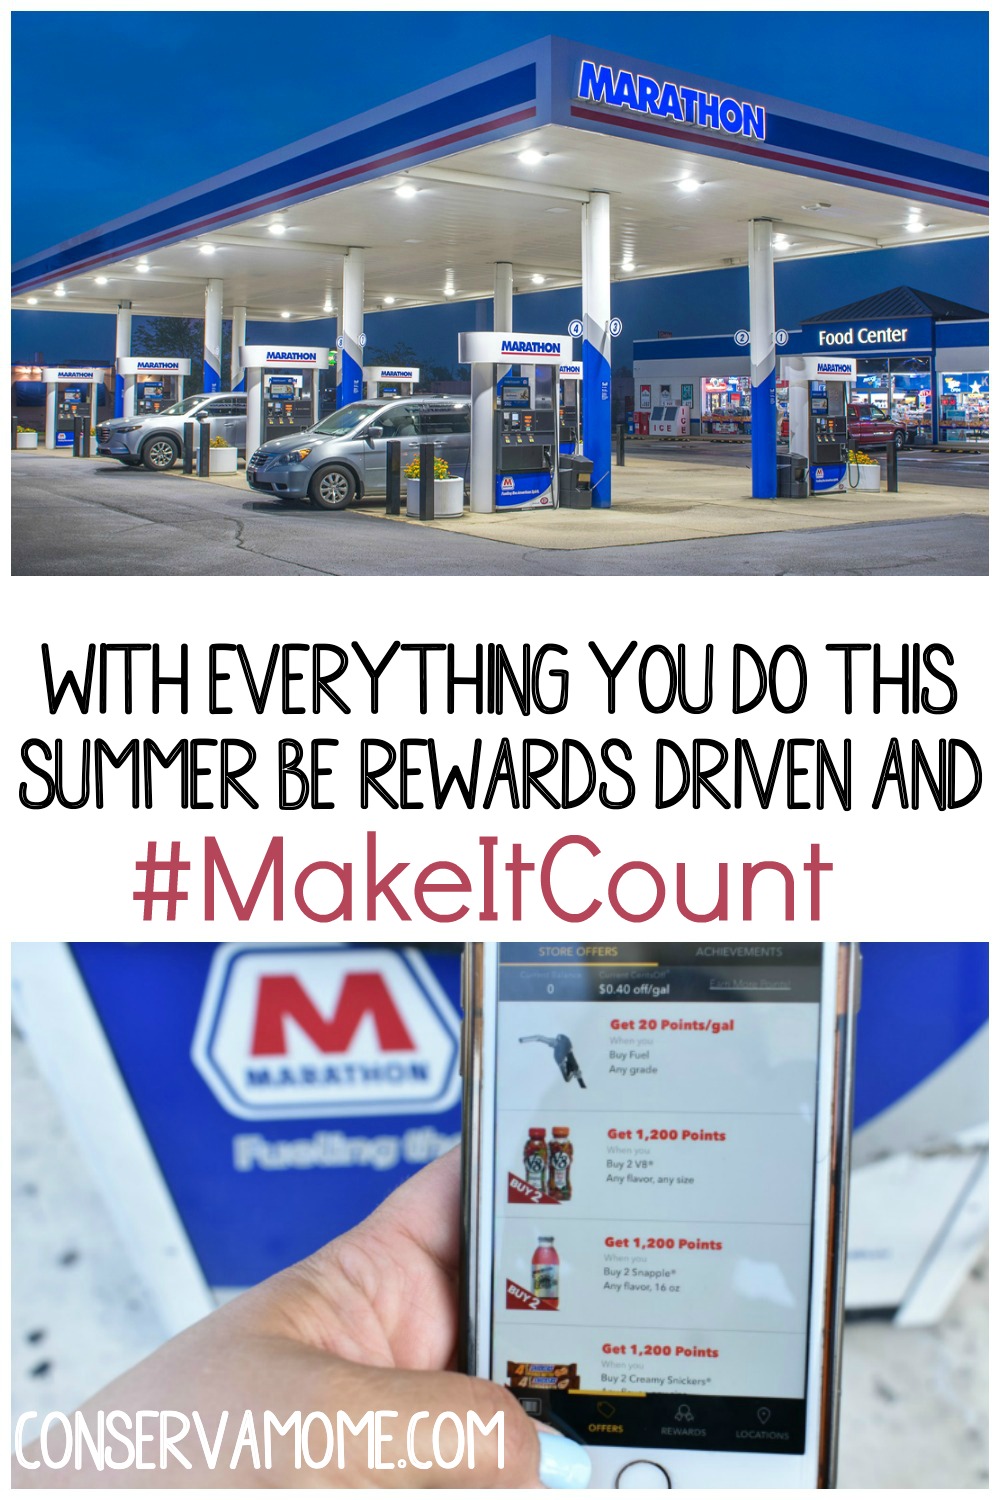 With everything you do this summer be rewards driven and #MakeitCount